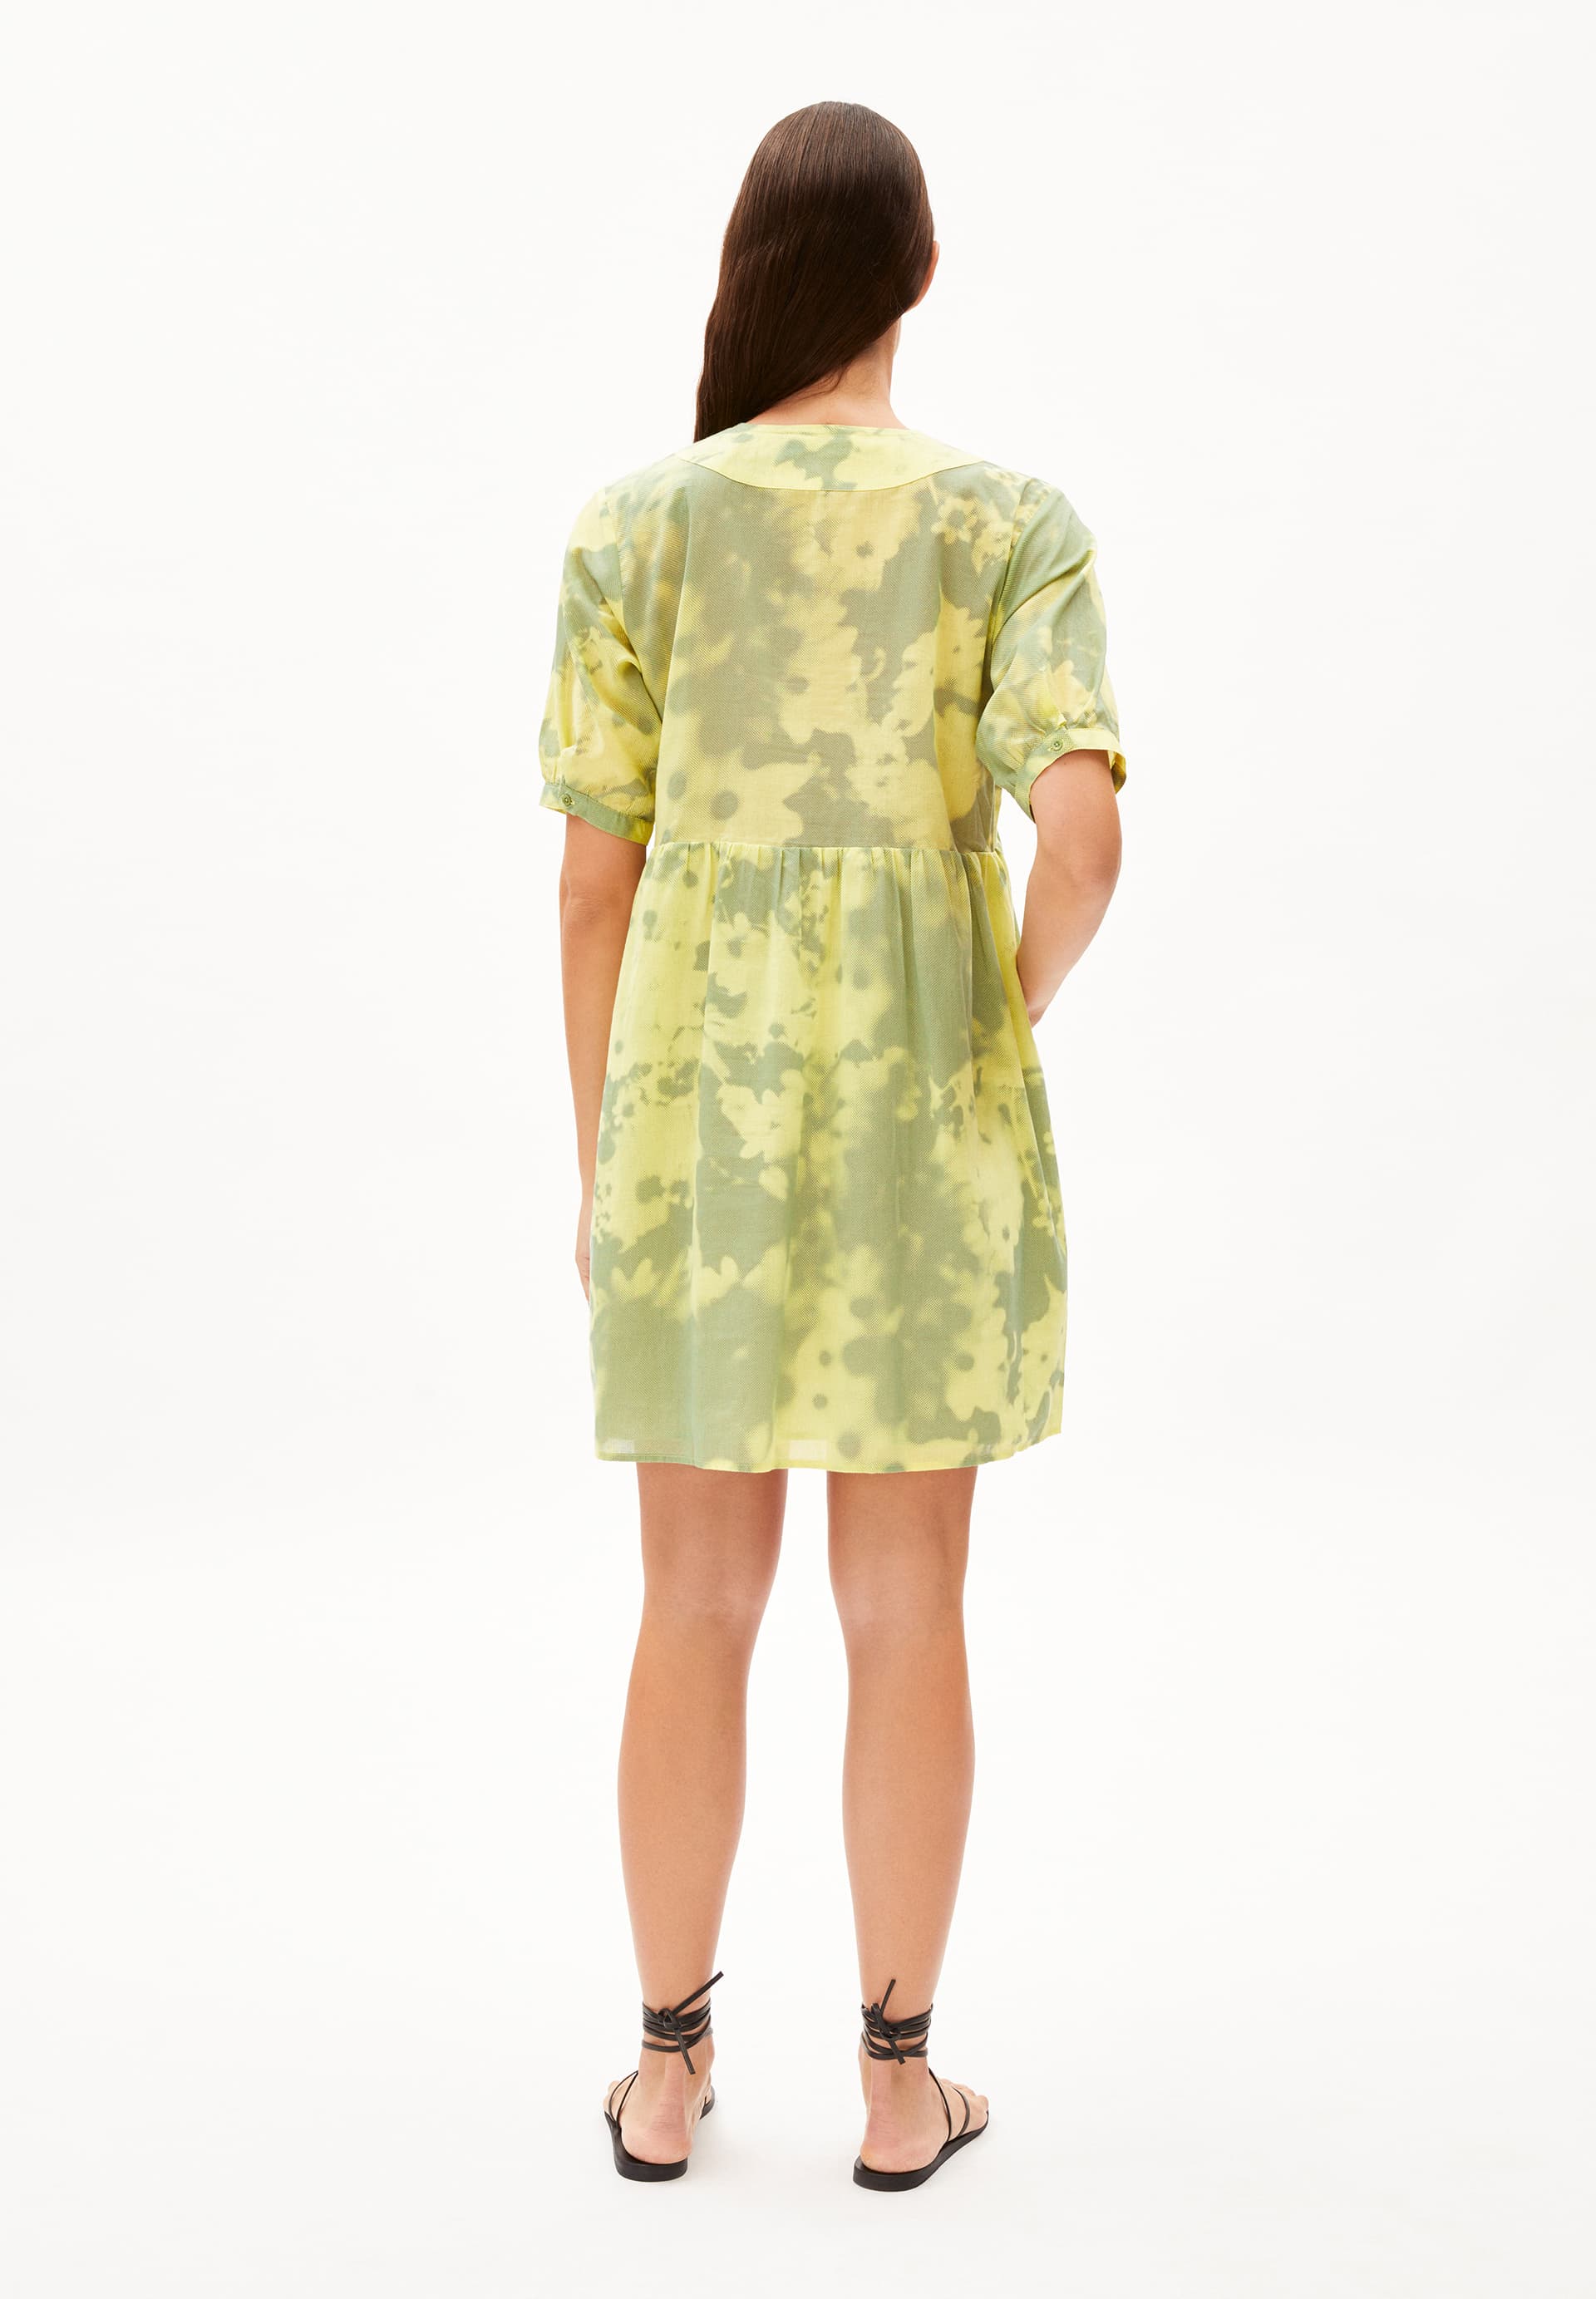 FLORINDAA BLOMMAA Woven Dress Relaxed Fit made of Organic Cotton